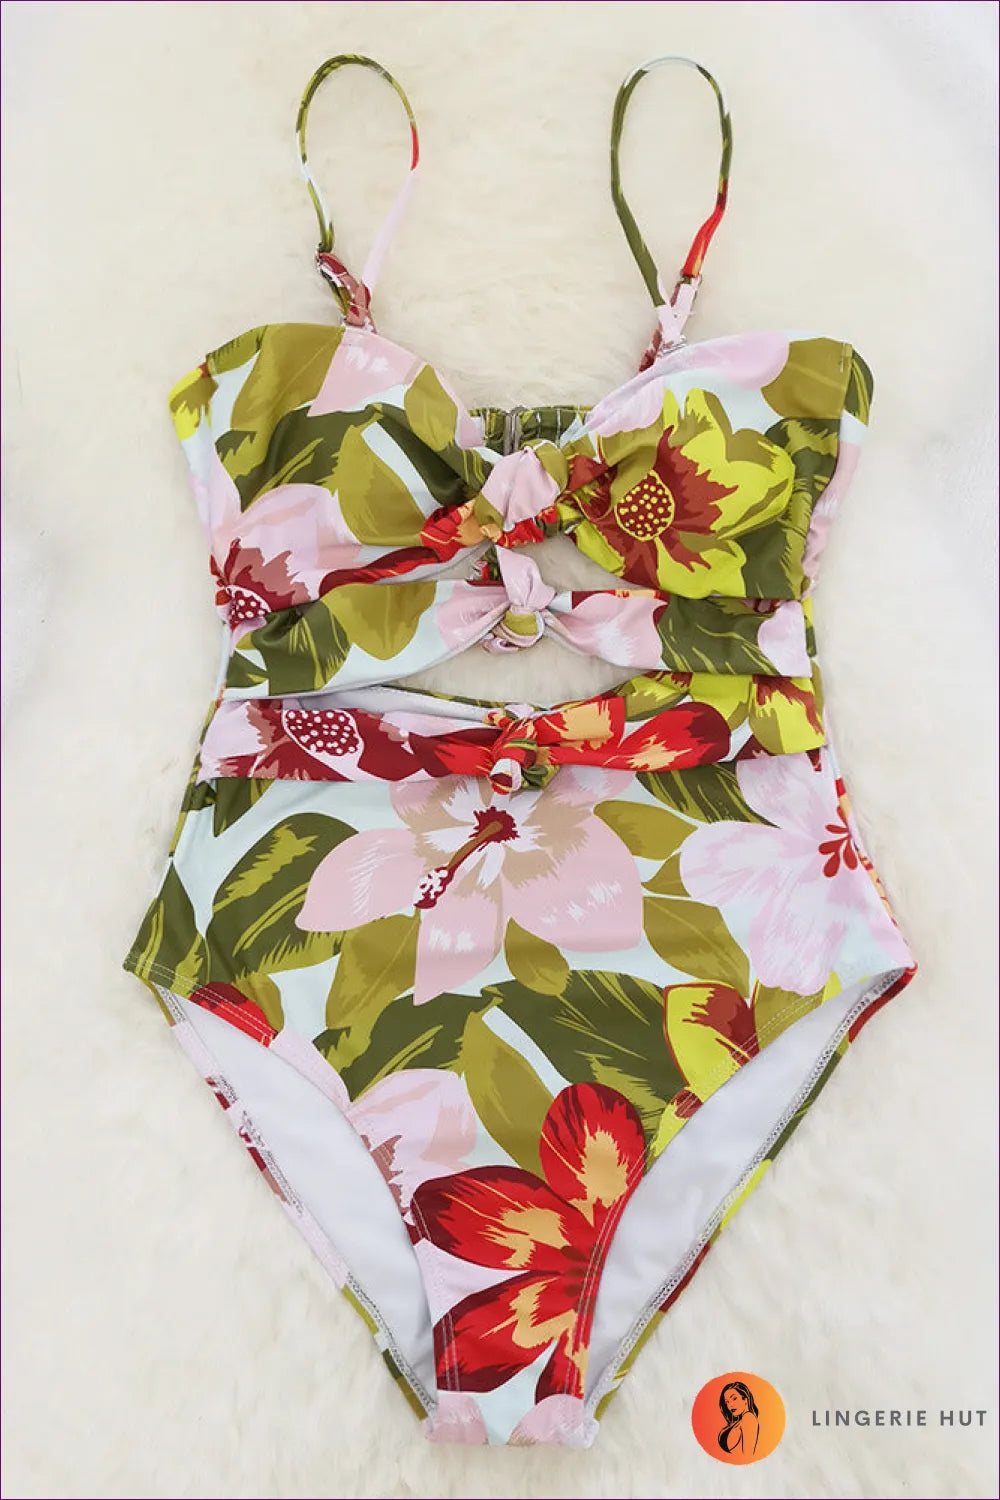 Unleash Your Boho Spirit With The One-piece Floral Swimsuit - Limited Collection! Styling Tip Elevate Your